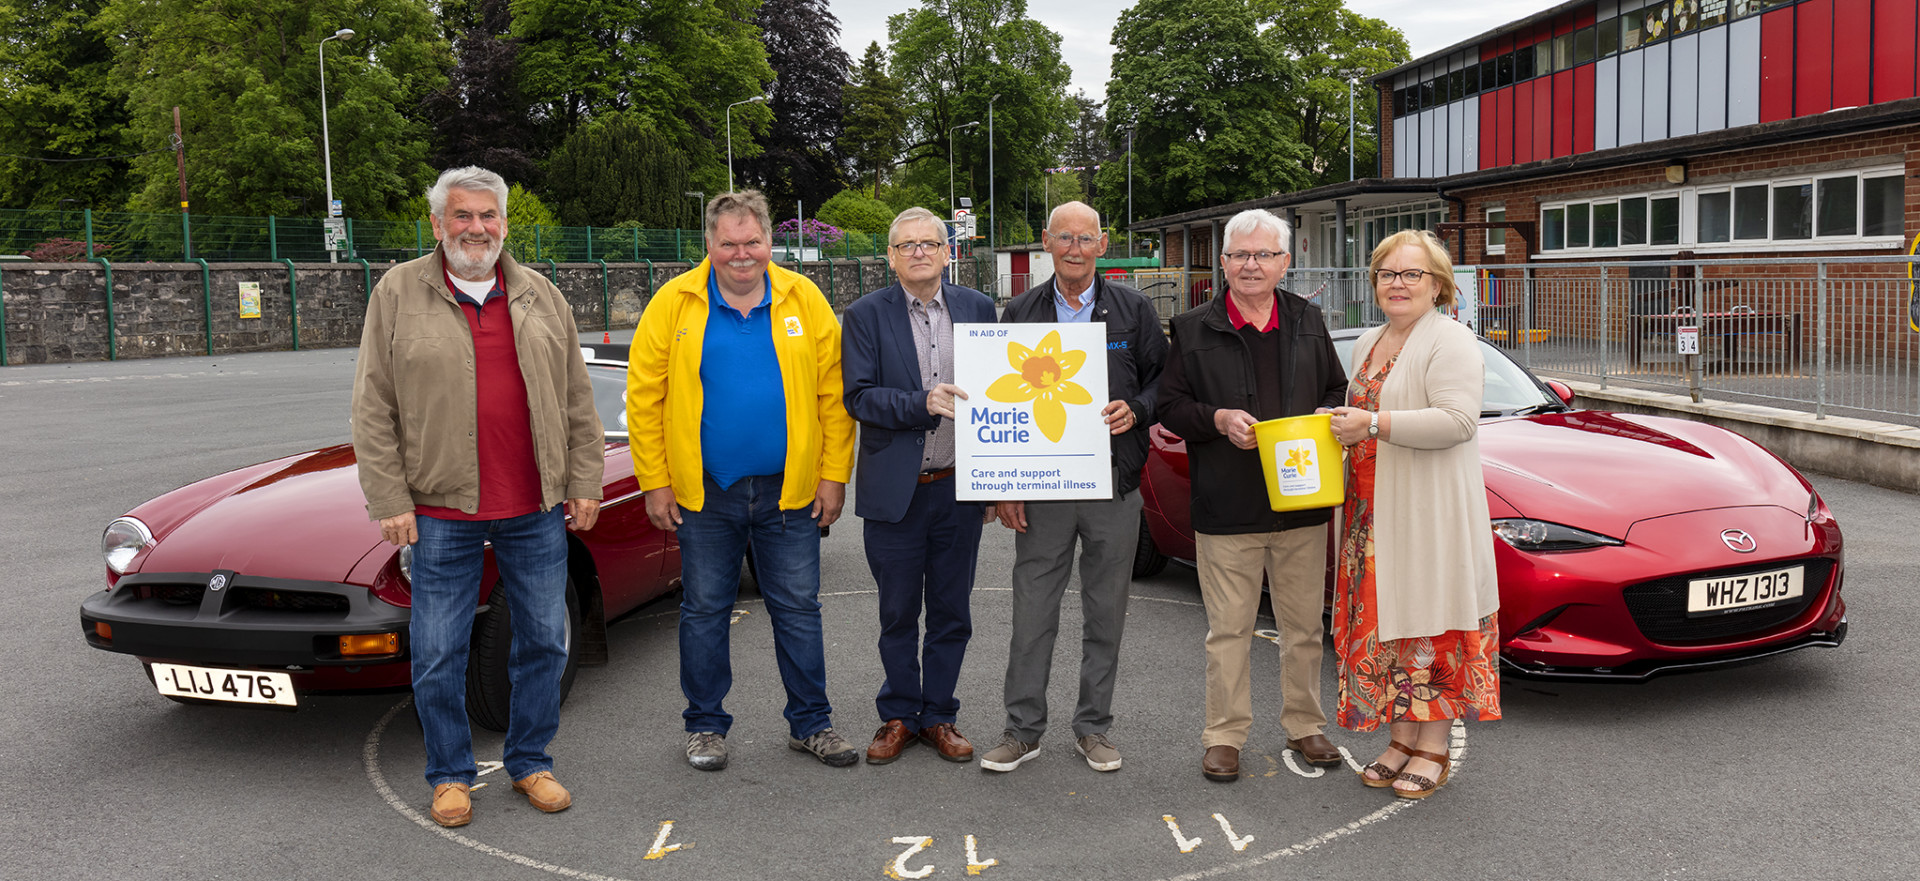 Vintage rally to be held in aid of Marie Curie